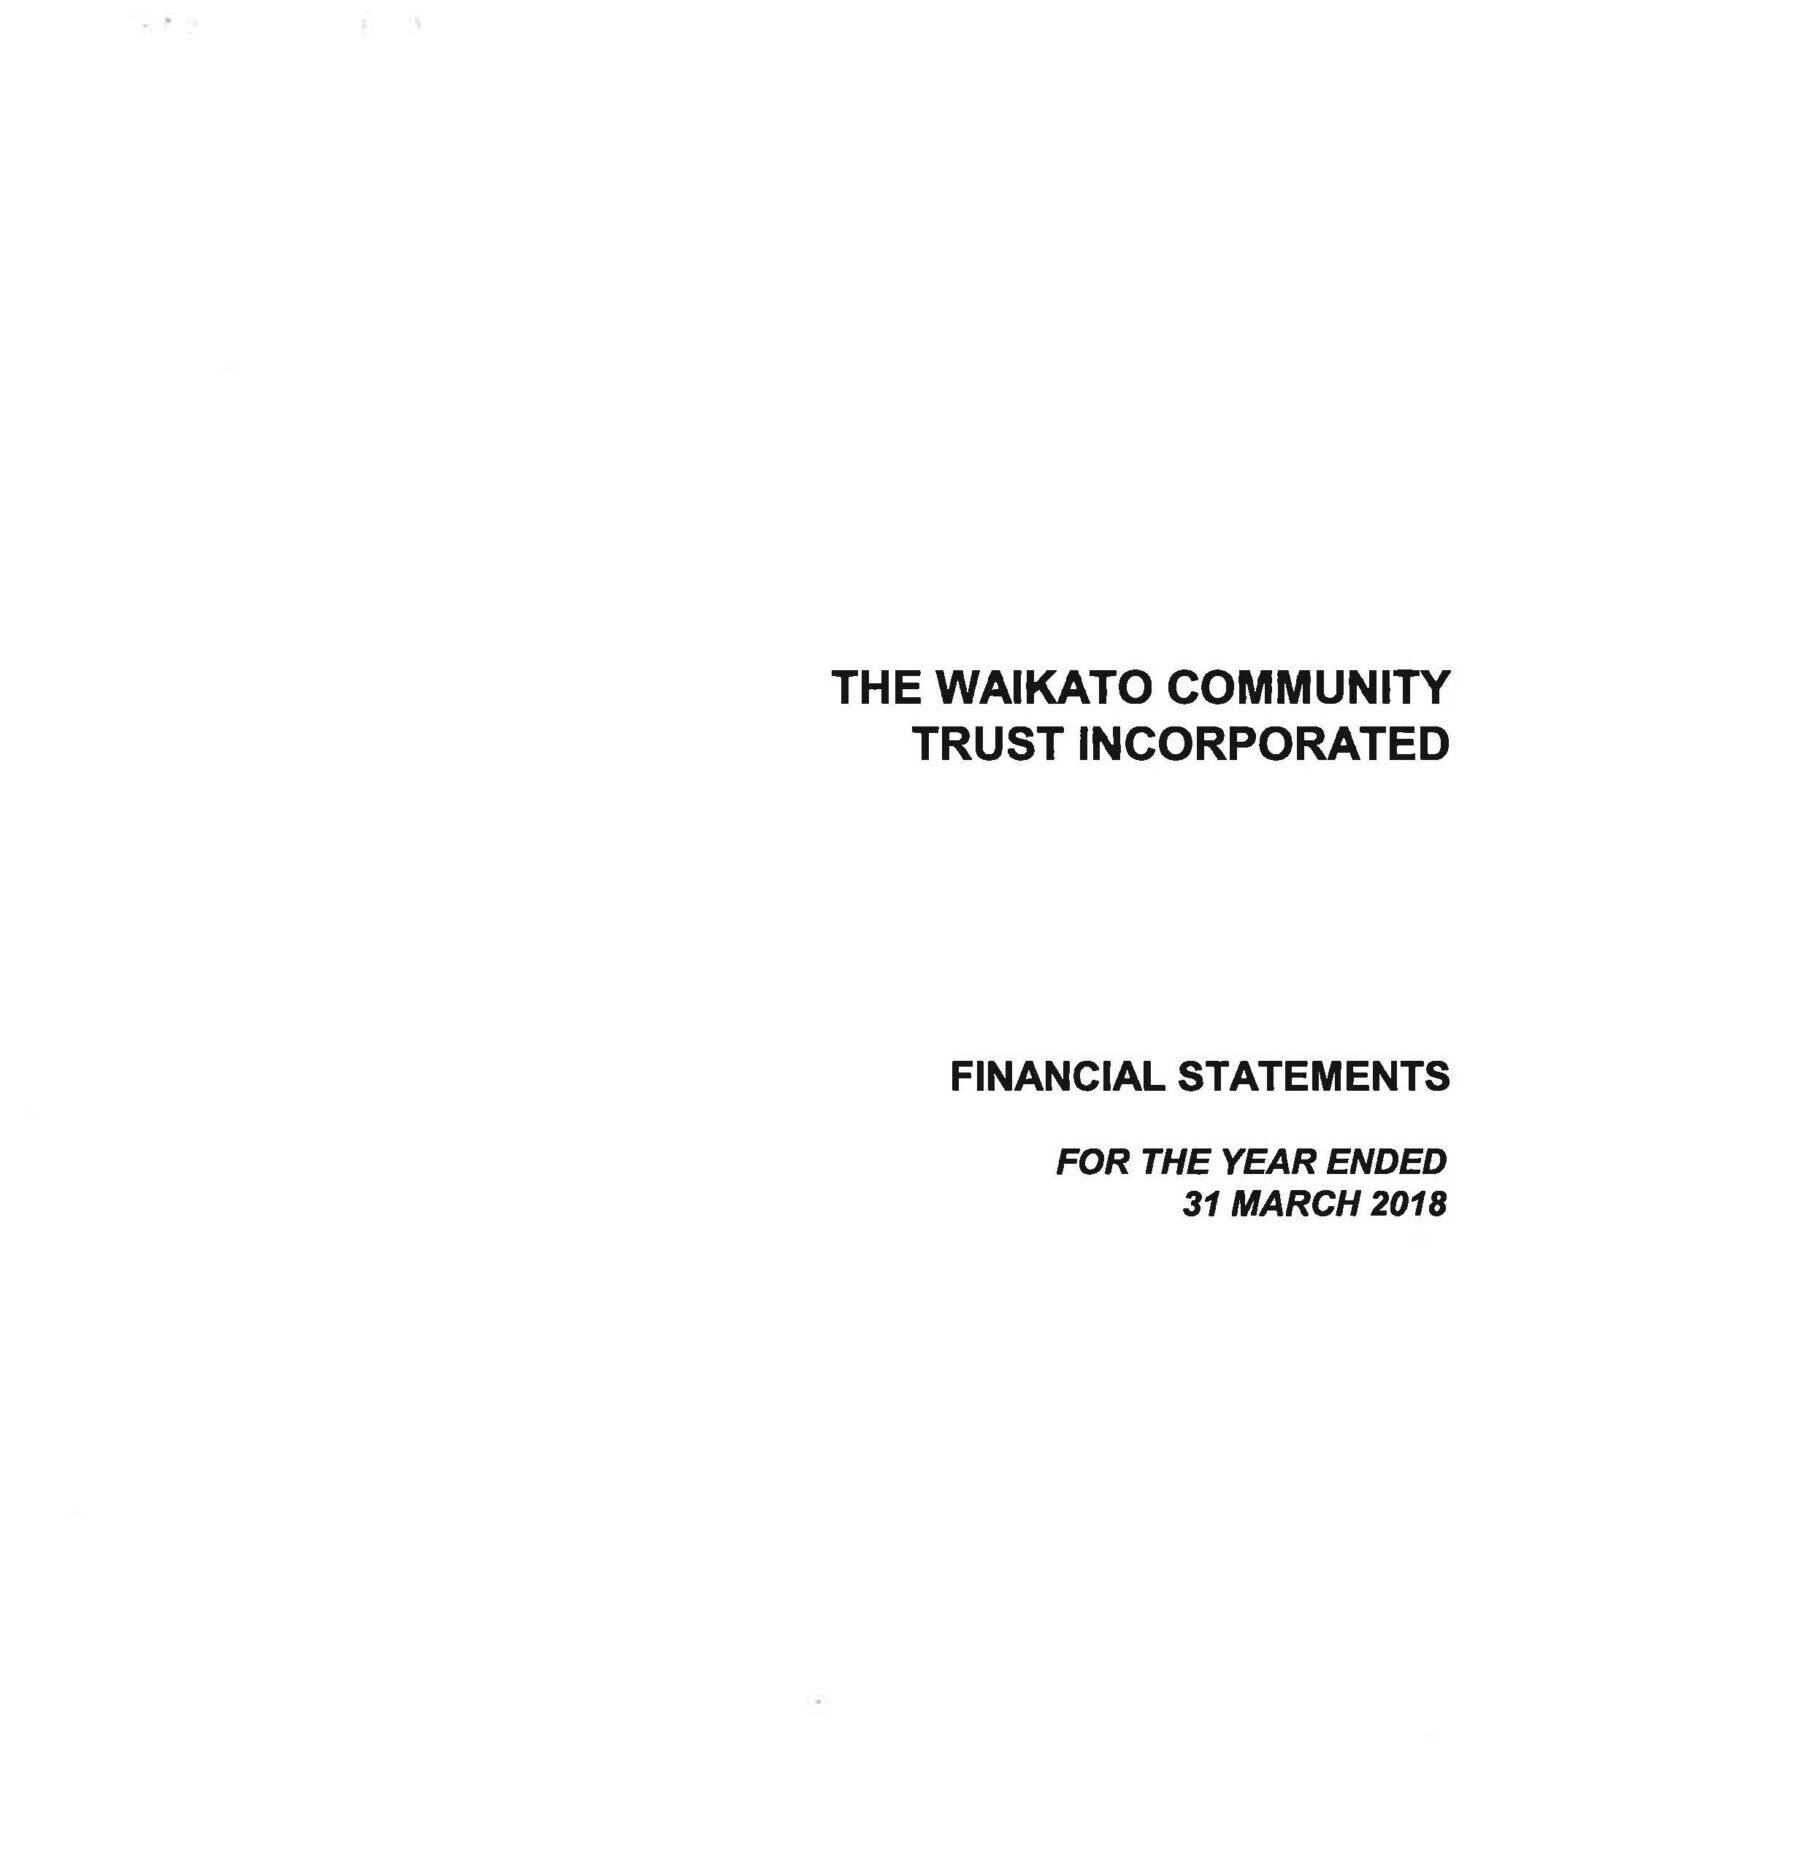 The Waikato Community Trust Incorporated Financial Statements for the year ended 31 March 2018